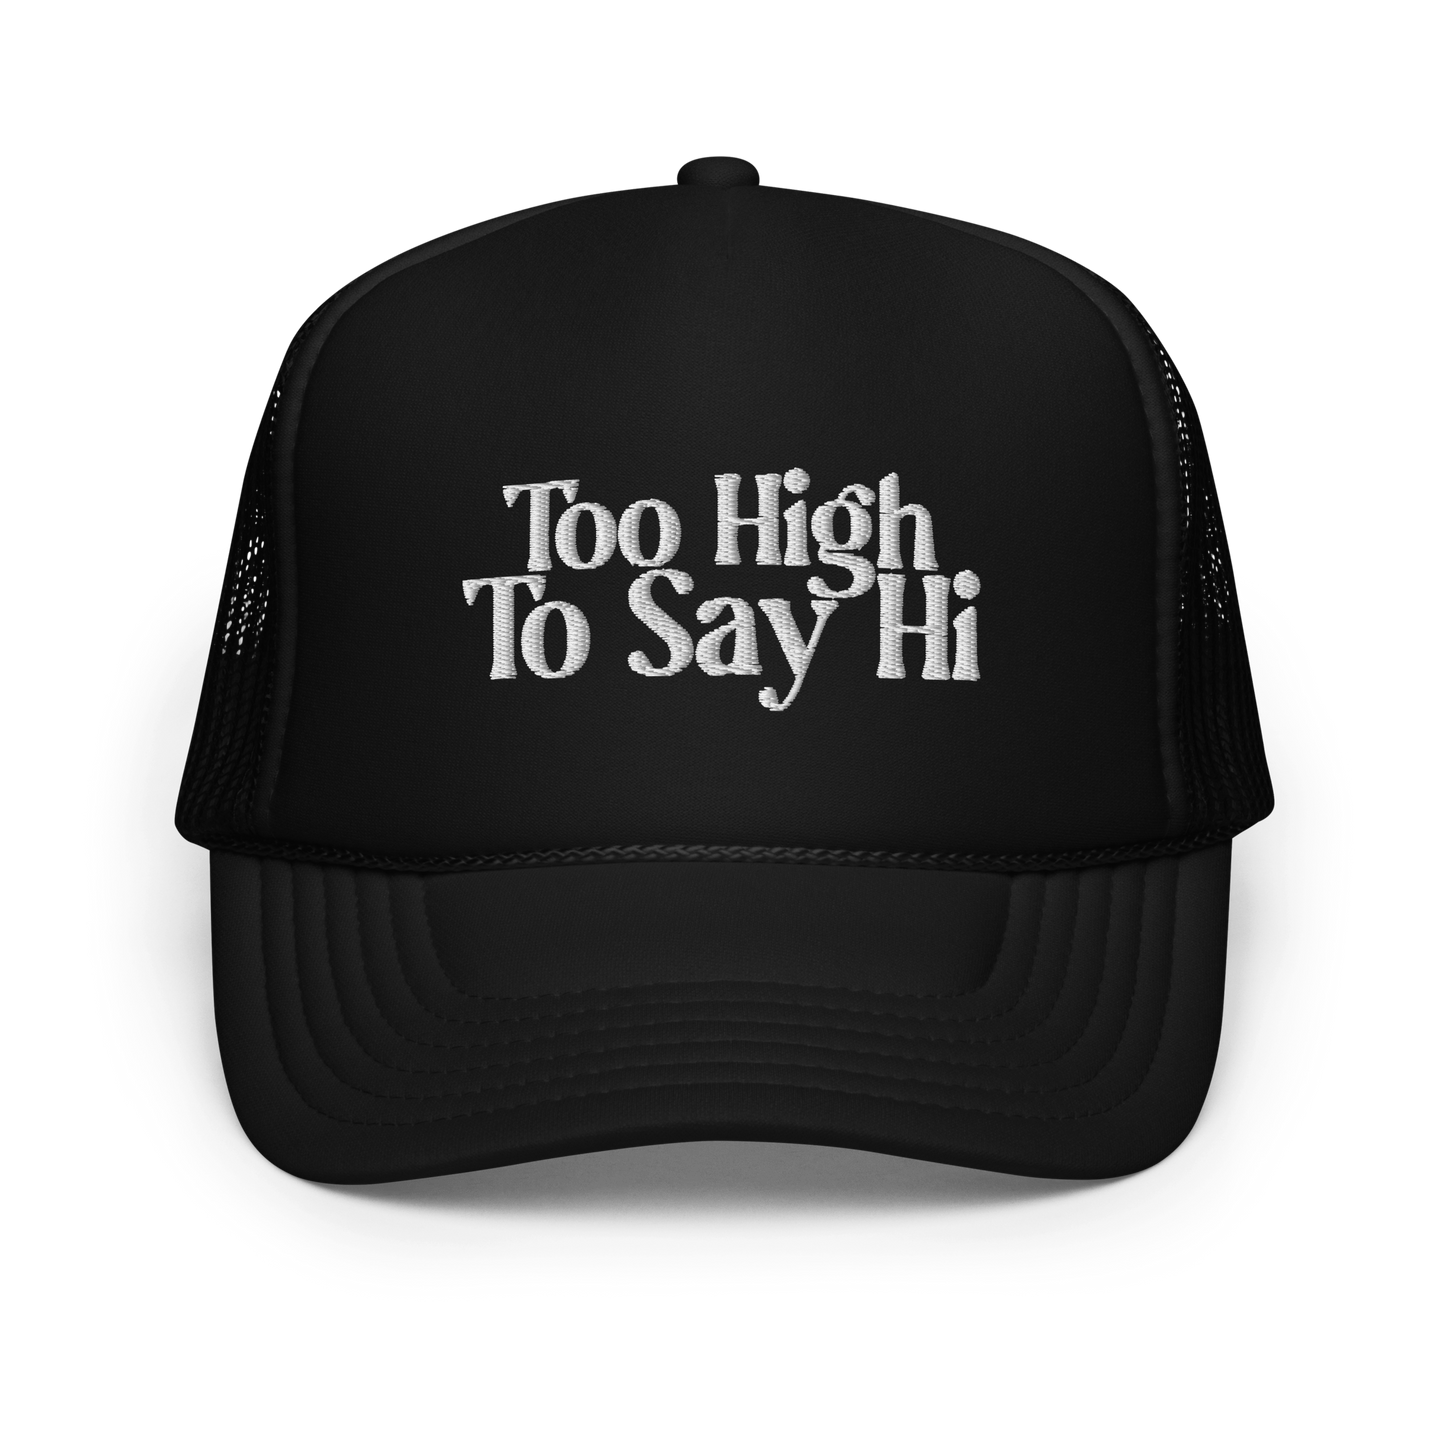 To High To Say High - White Stitch Edition